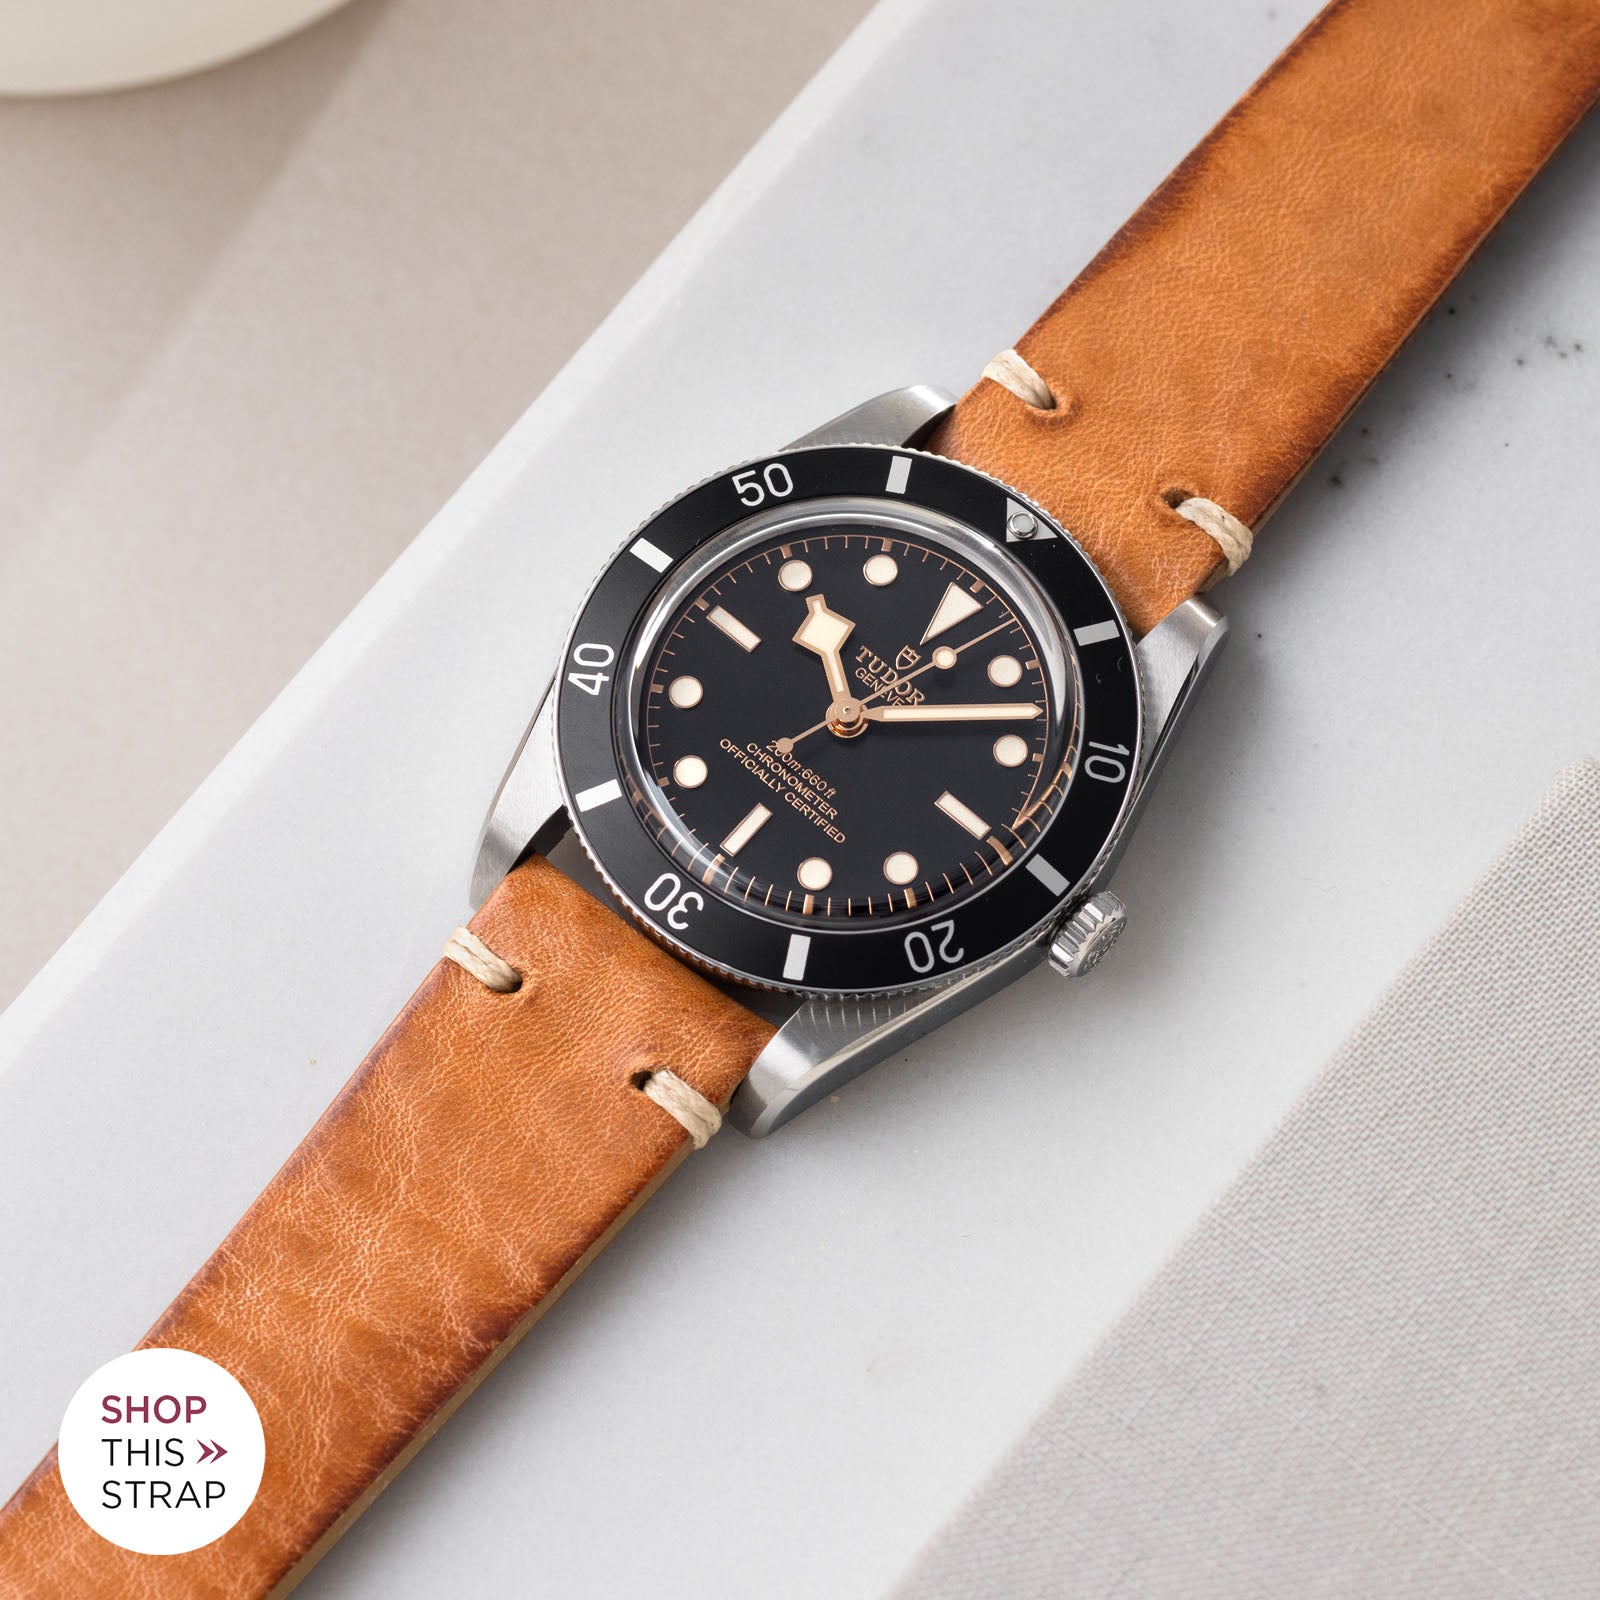 Bulang and Sons_Strapguide_Tudor Black Bay 54_314_Caramel Brown Leather Watch Strap